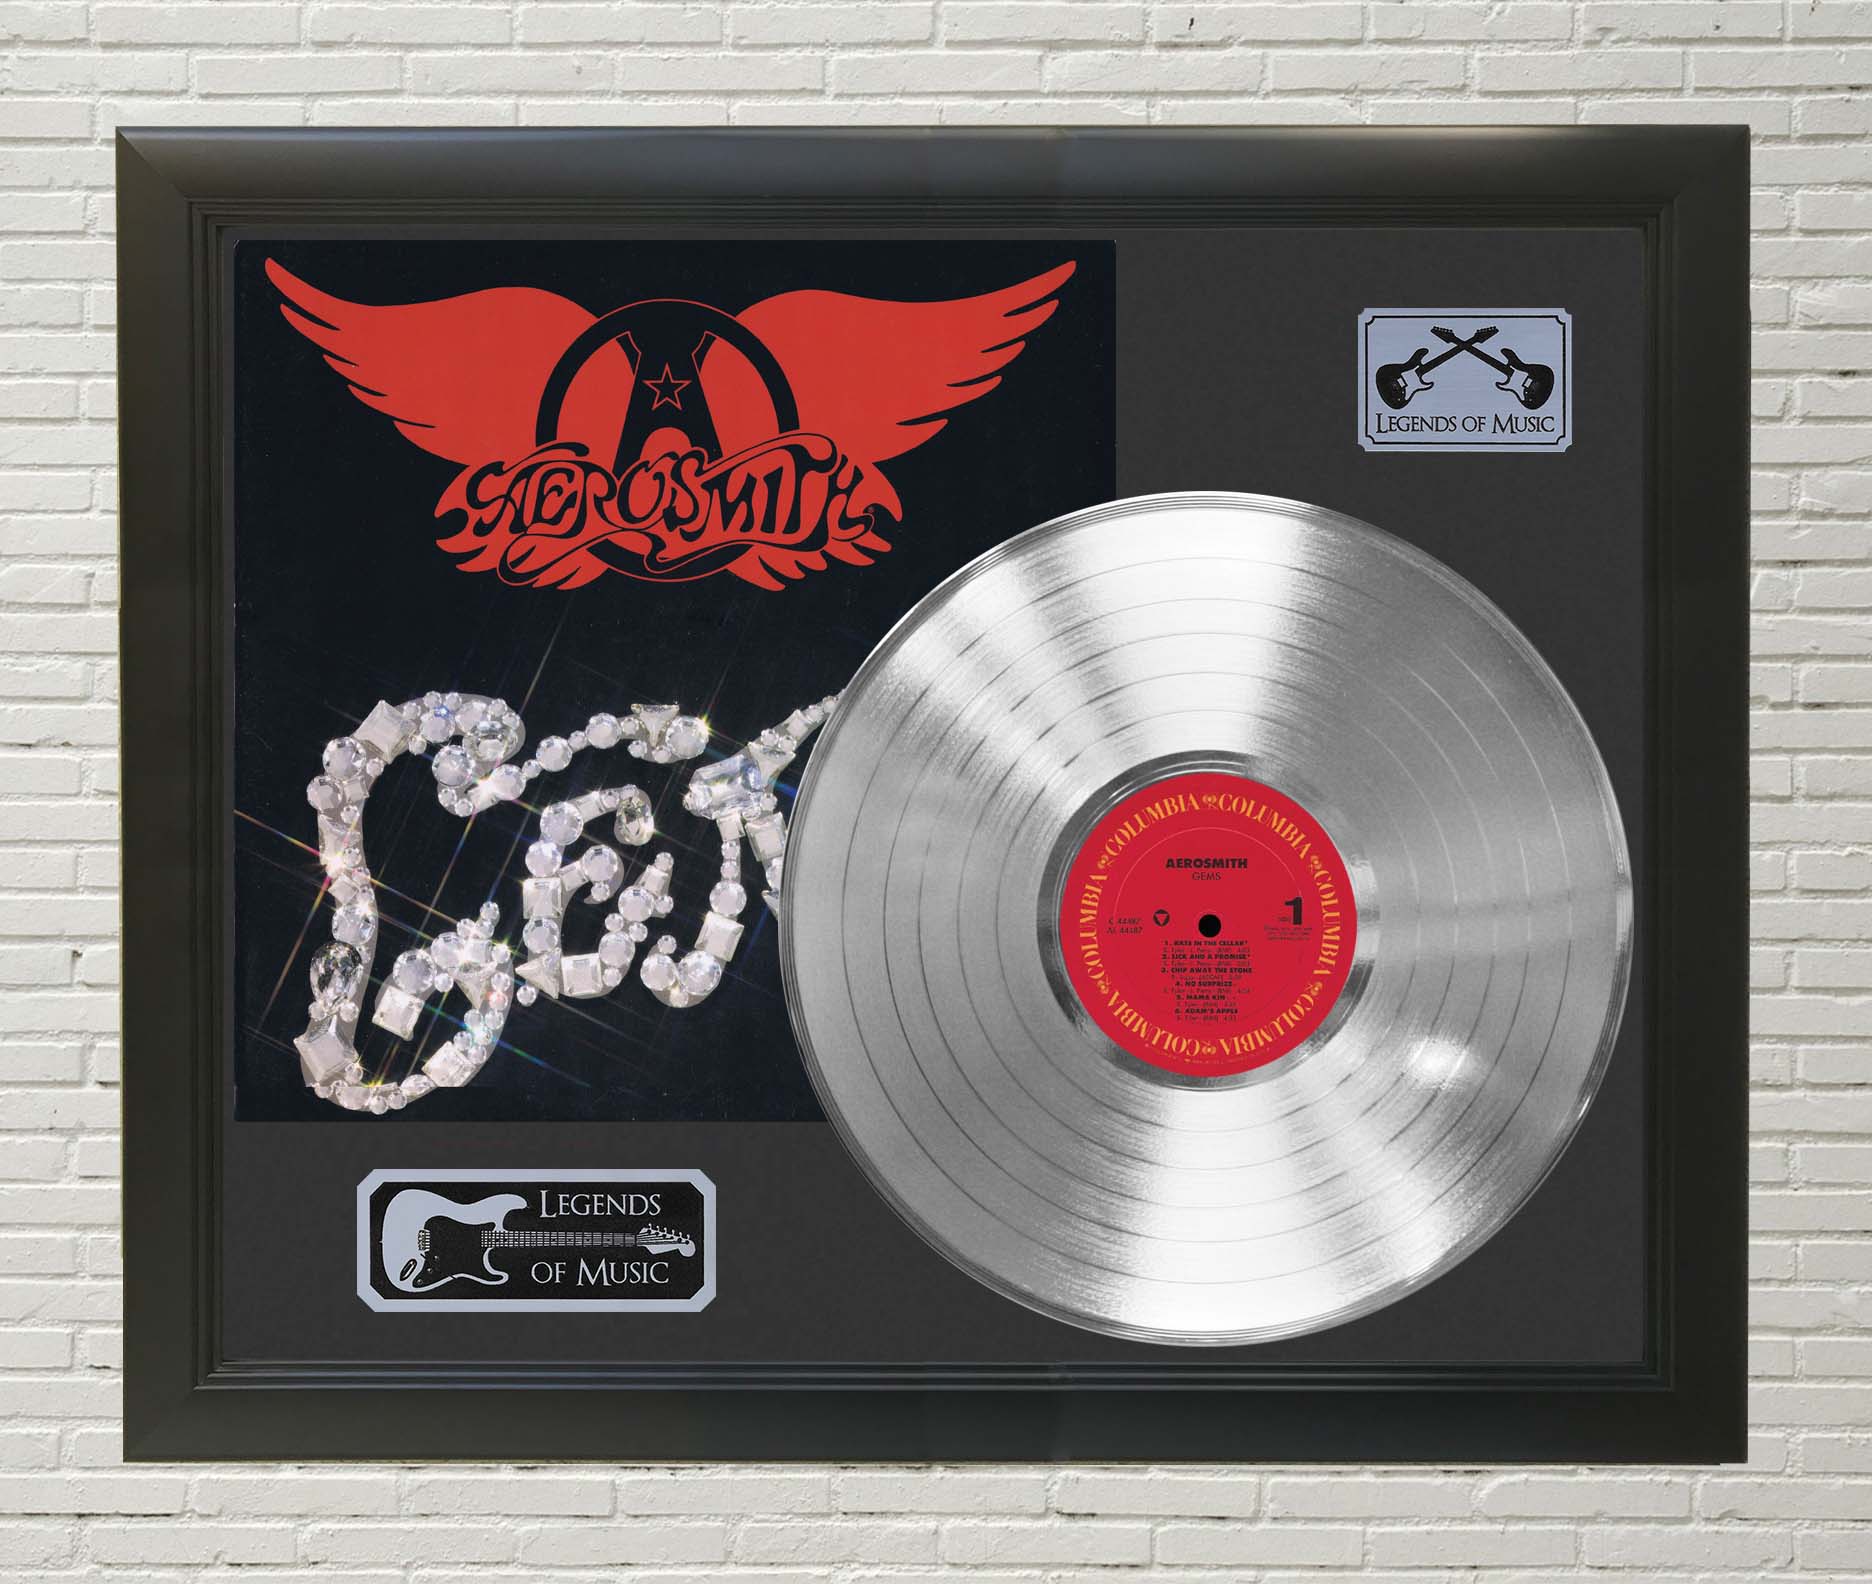 Aerosmith Gems Framed Platinum Lp Record Display C3 Gold Record Outlet Album And Disc